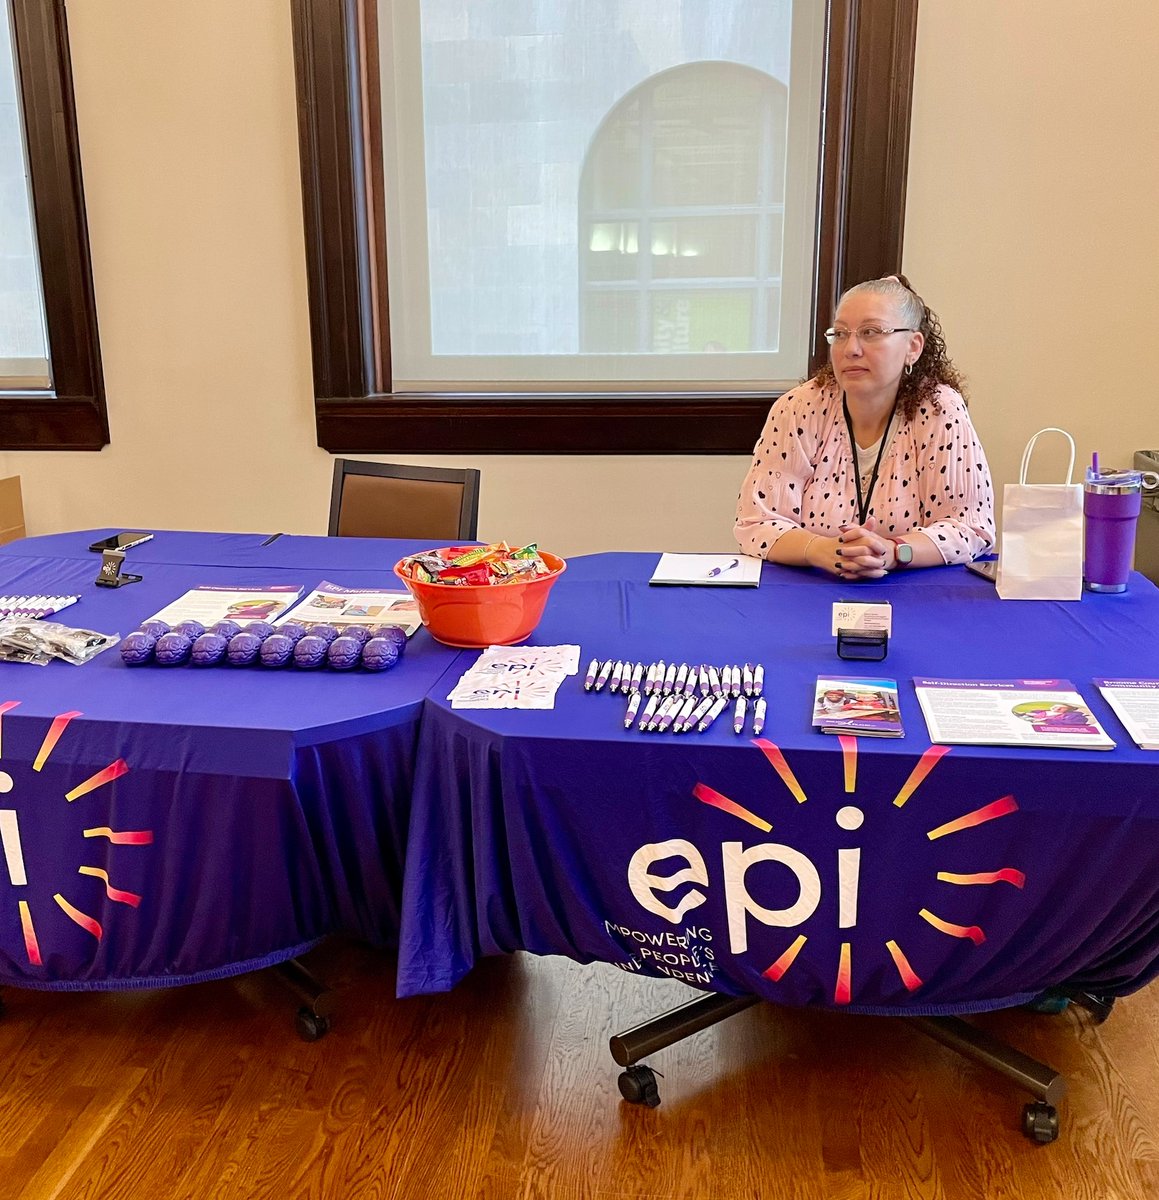 EPI is attending the Binghamton LIFEPlan CCO NY Provider Fair at the SUNY Broome Culinary Center today. Stop by our table and get information about our programs and services! #epi #idd #services #selfdirection #dayhabilitation #opwdd